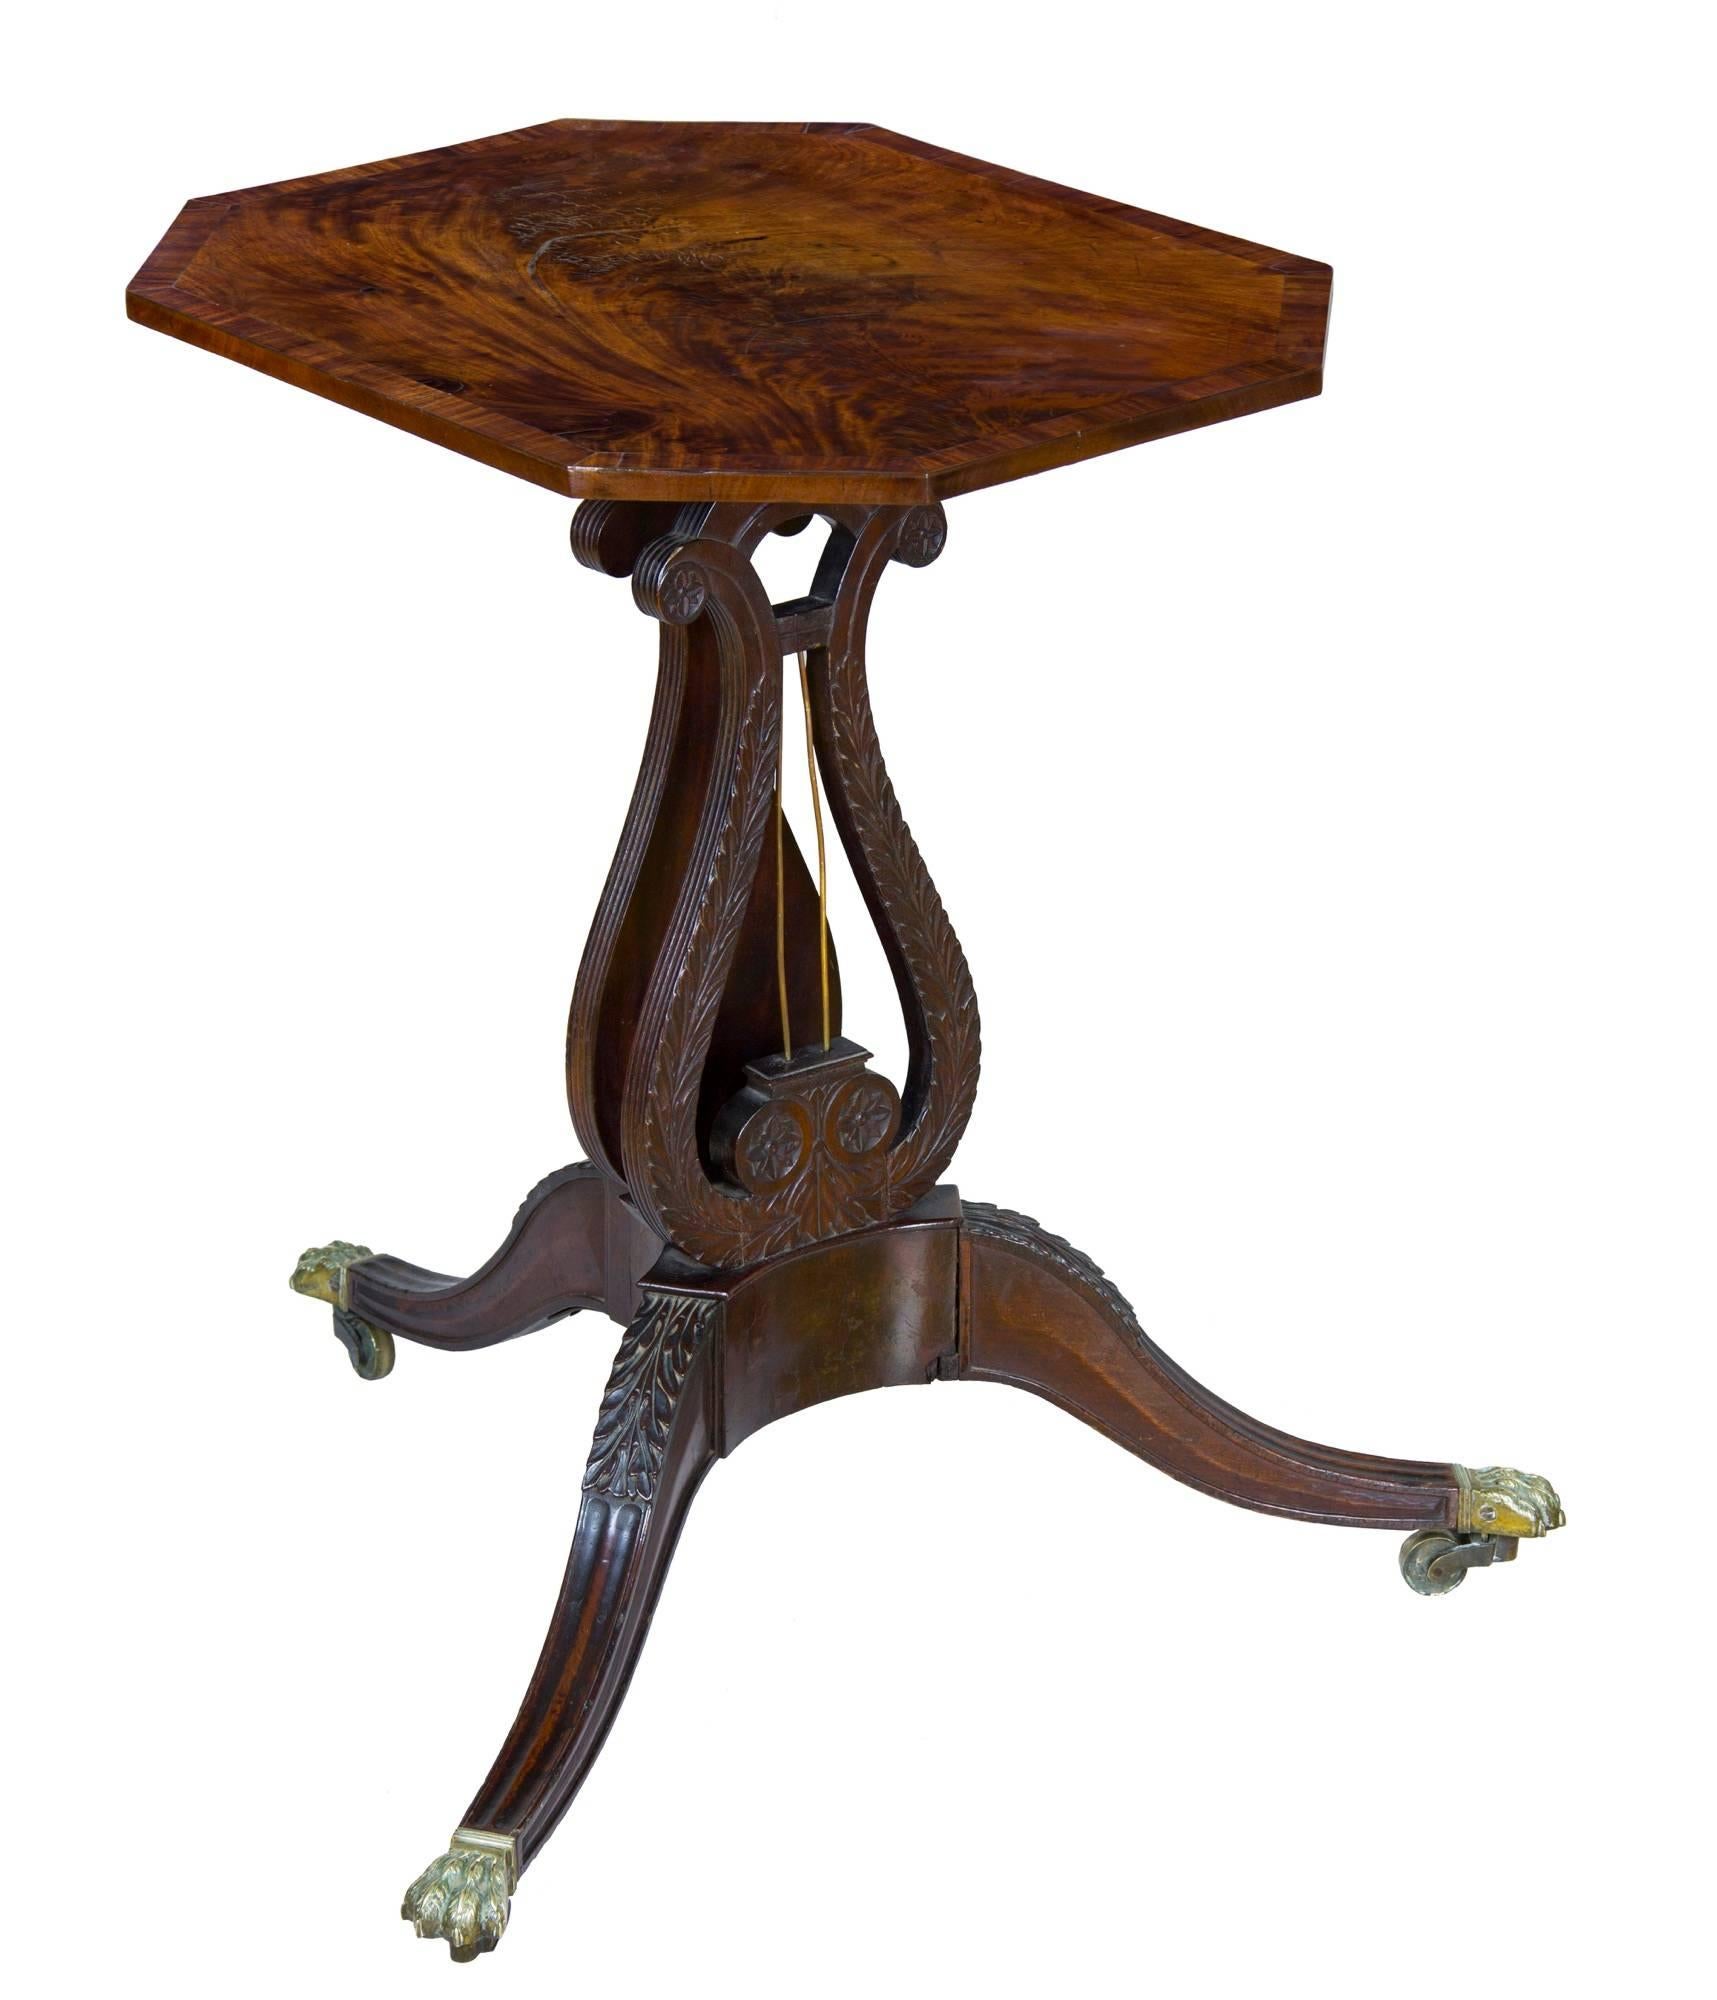 Lyre card tables and work tables are found in many collections and museums, but a tilt-top table in the lyre form is unknown. This table came out of the collection of Joan Oestreich Kend (highly regarded collectors) handled by Sotheby’s. They